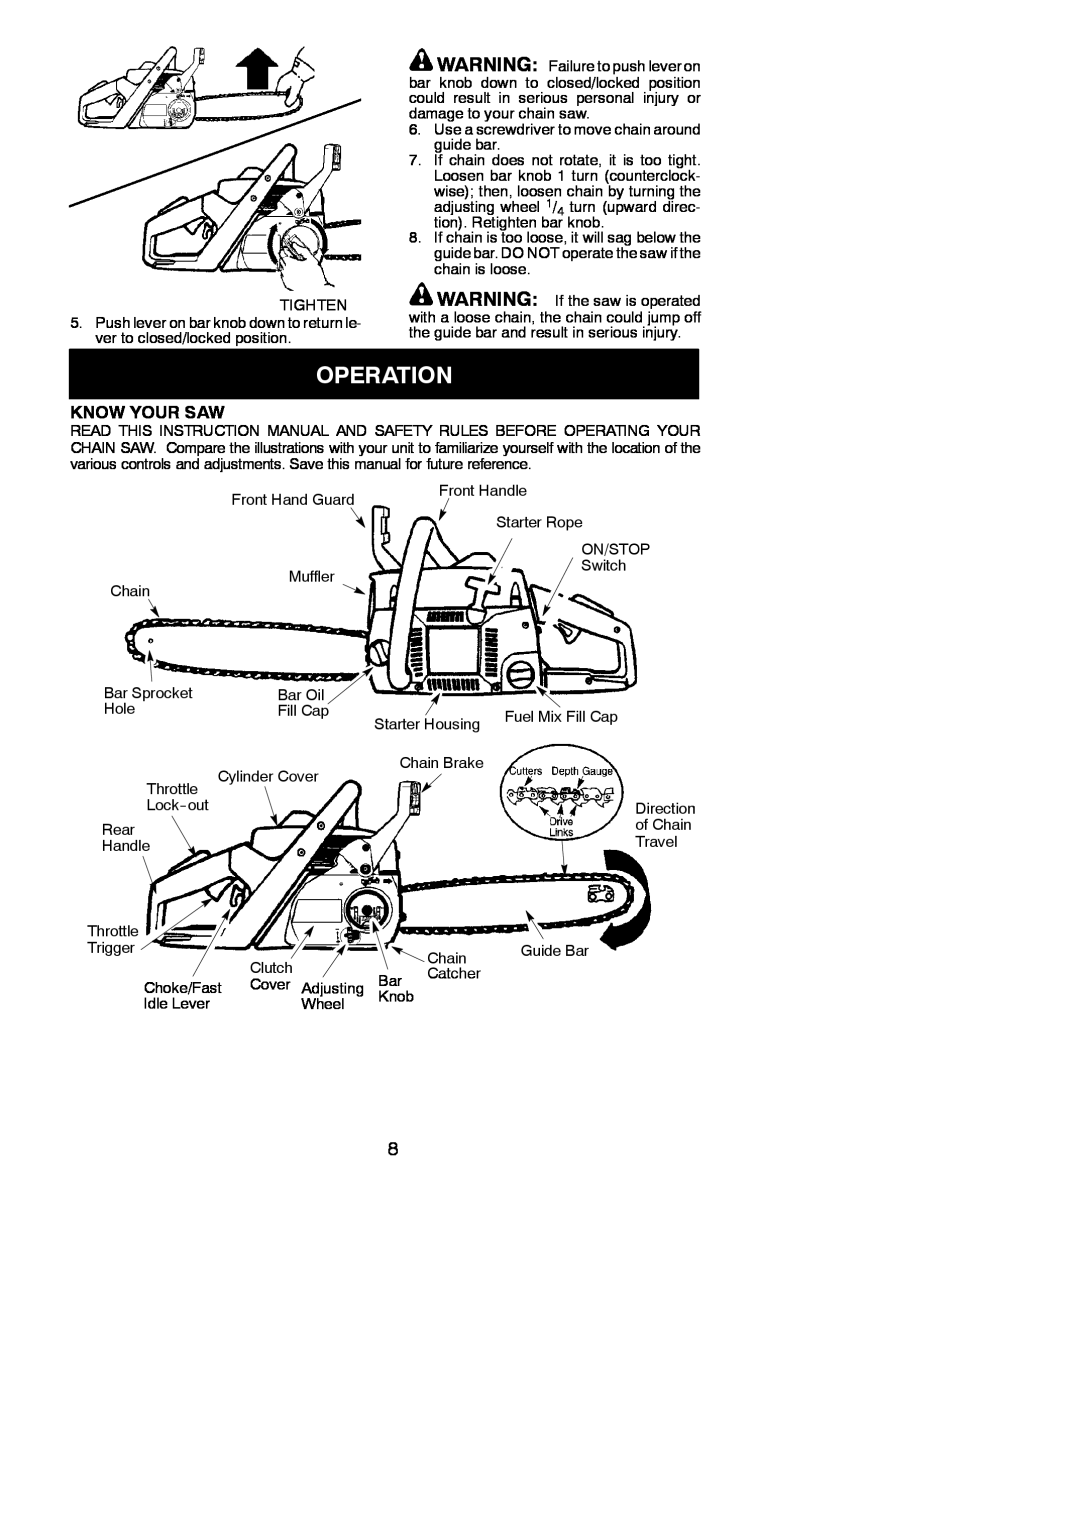 Poulan 545123817 instruction manual Operation, Know Your Saw 